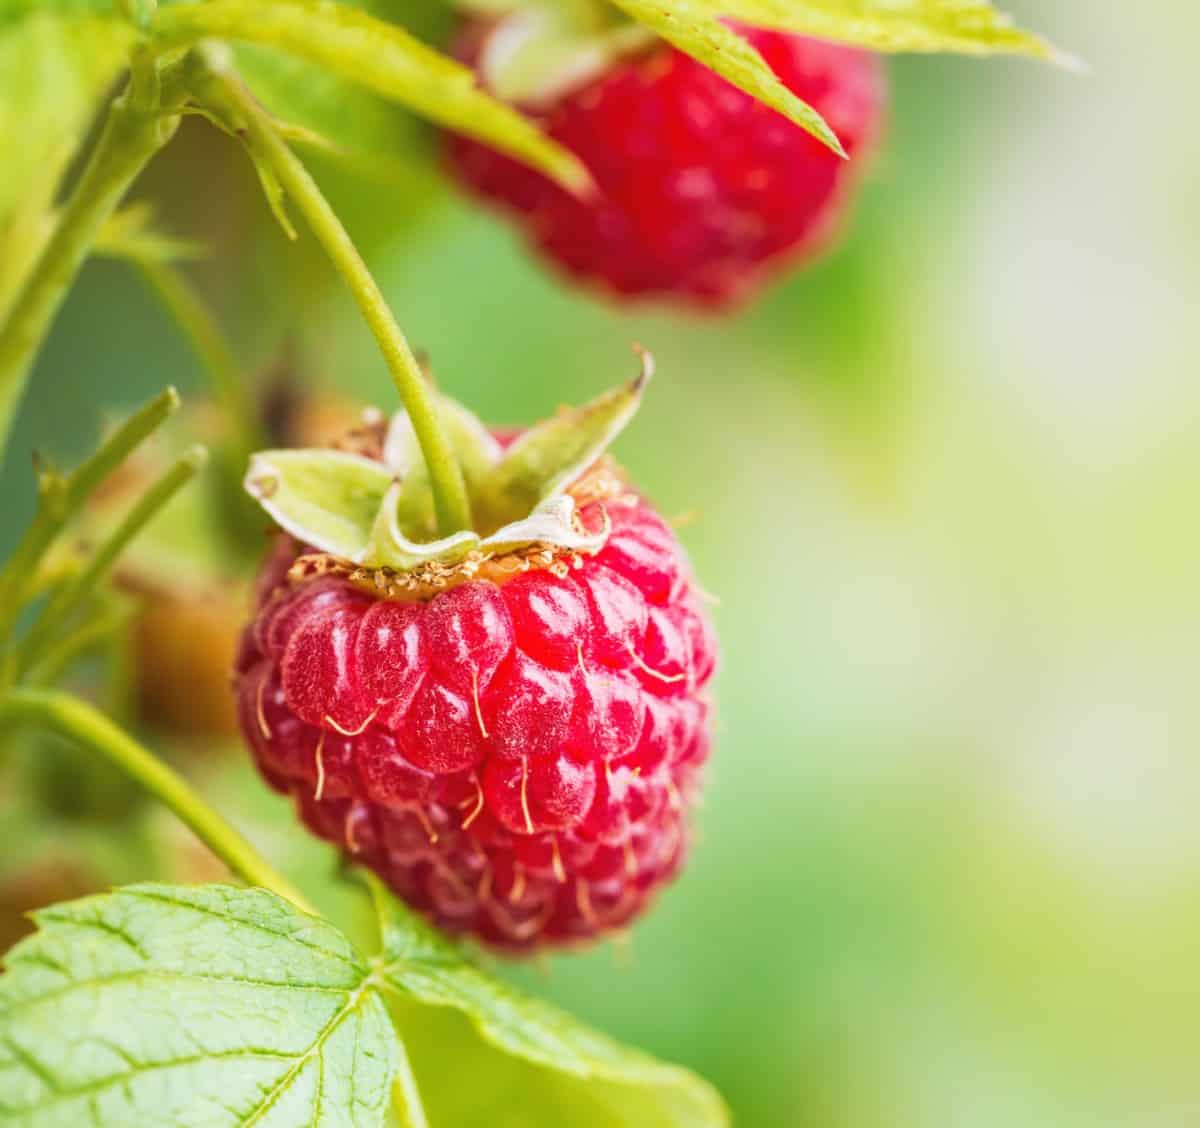 As long as you keep them pruned, raspberry plants can grow in containers.